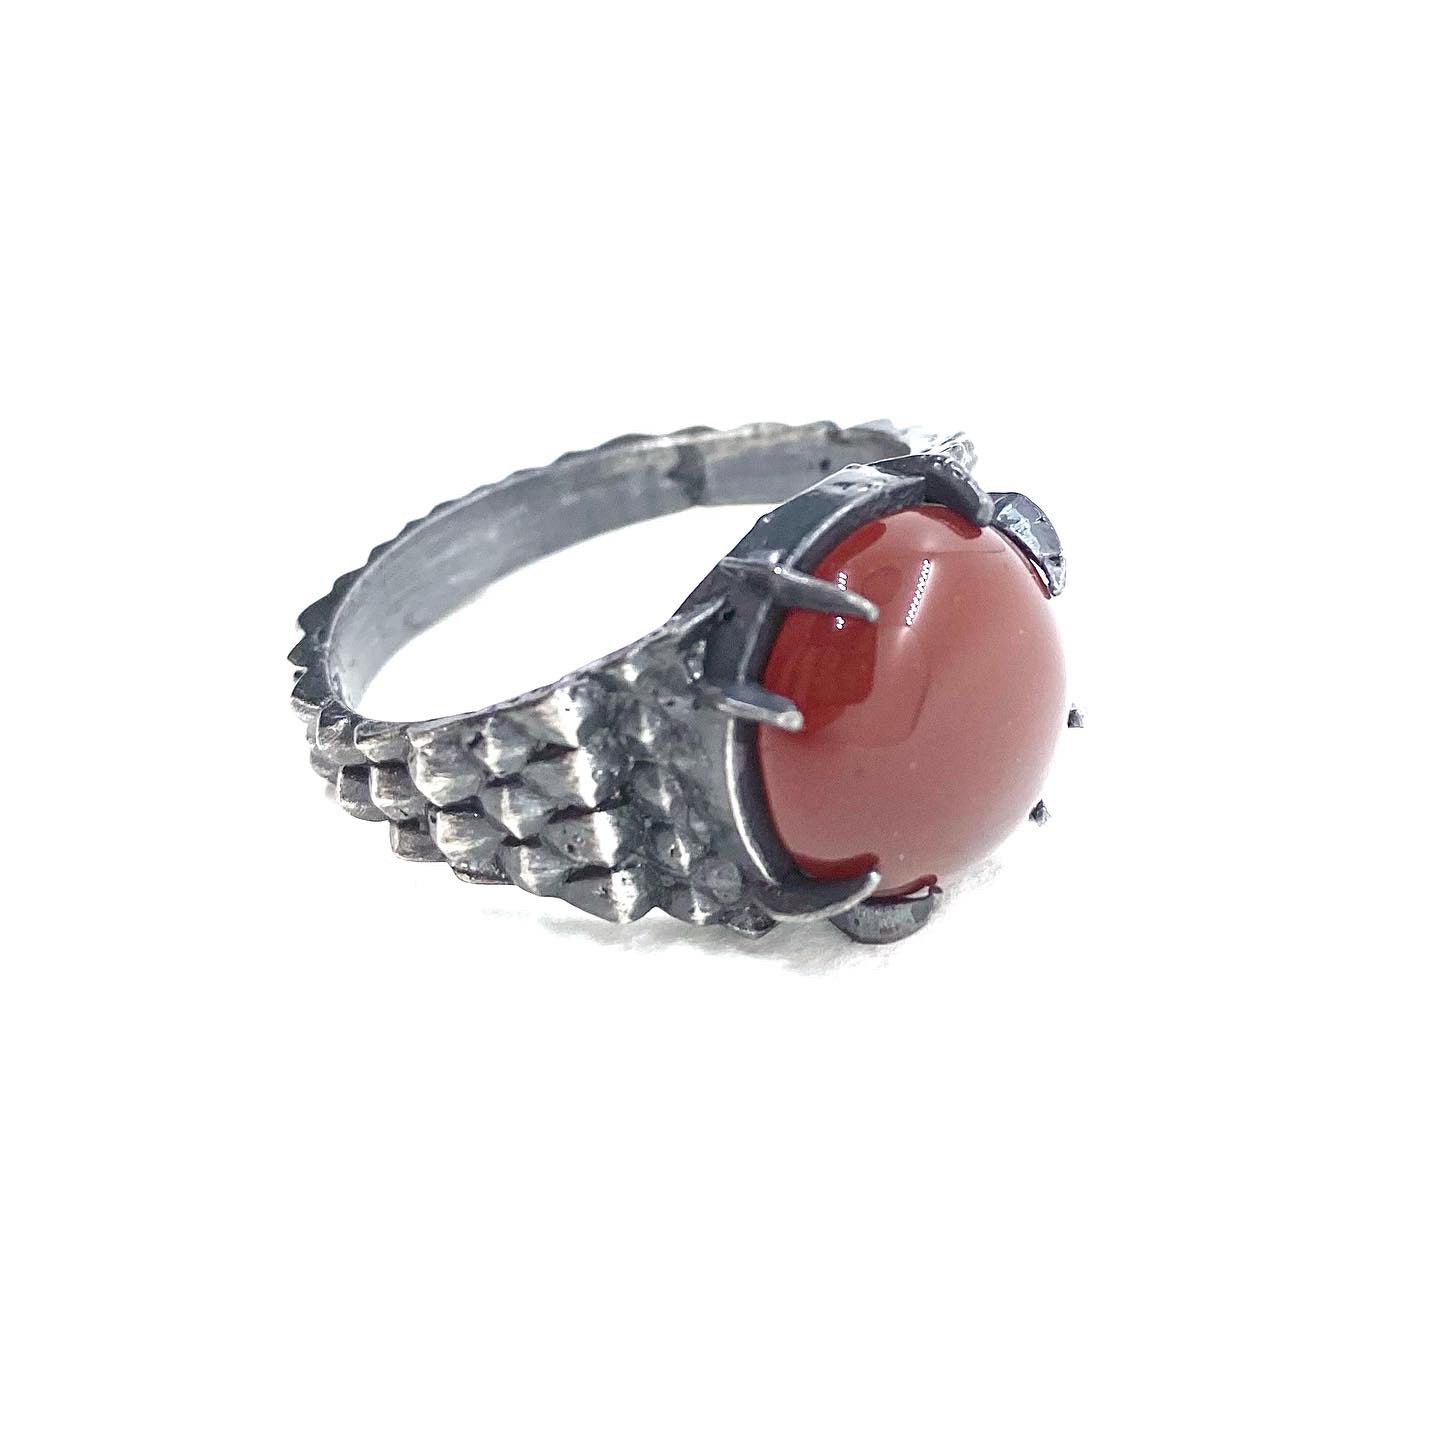 Dragon’s Claw Ring with Carnelian in Sterling Silver (size 14) - Nocturne LLC